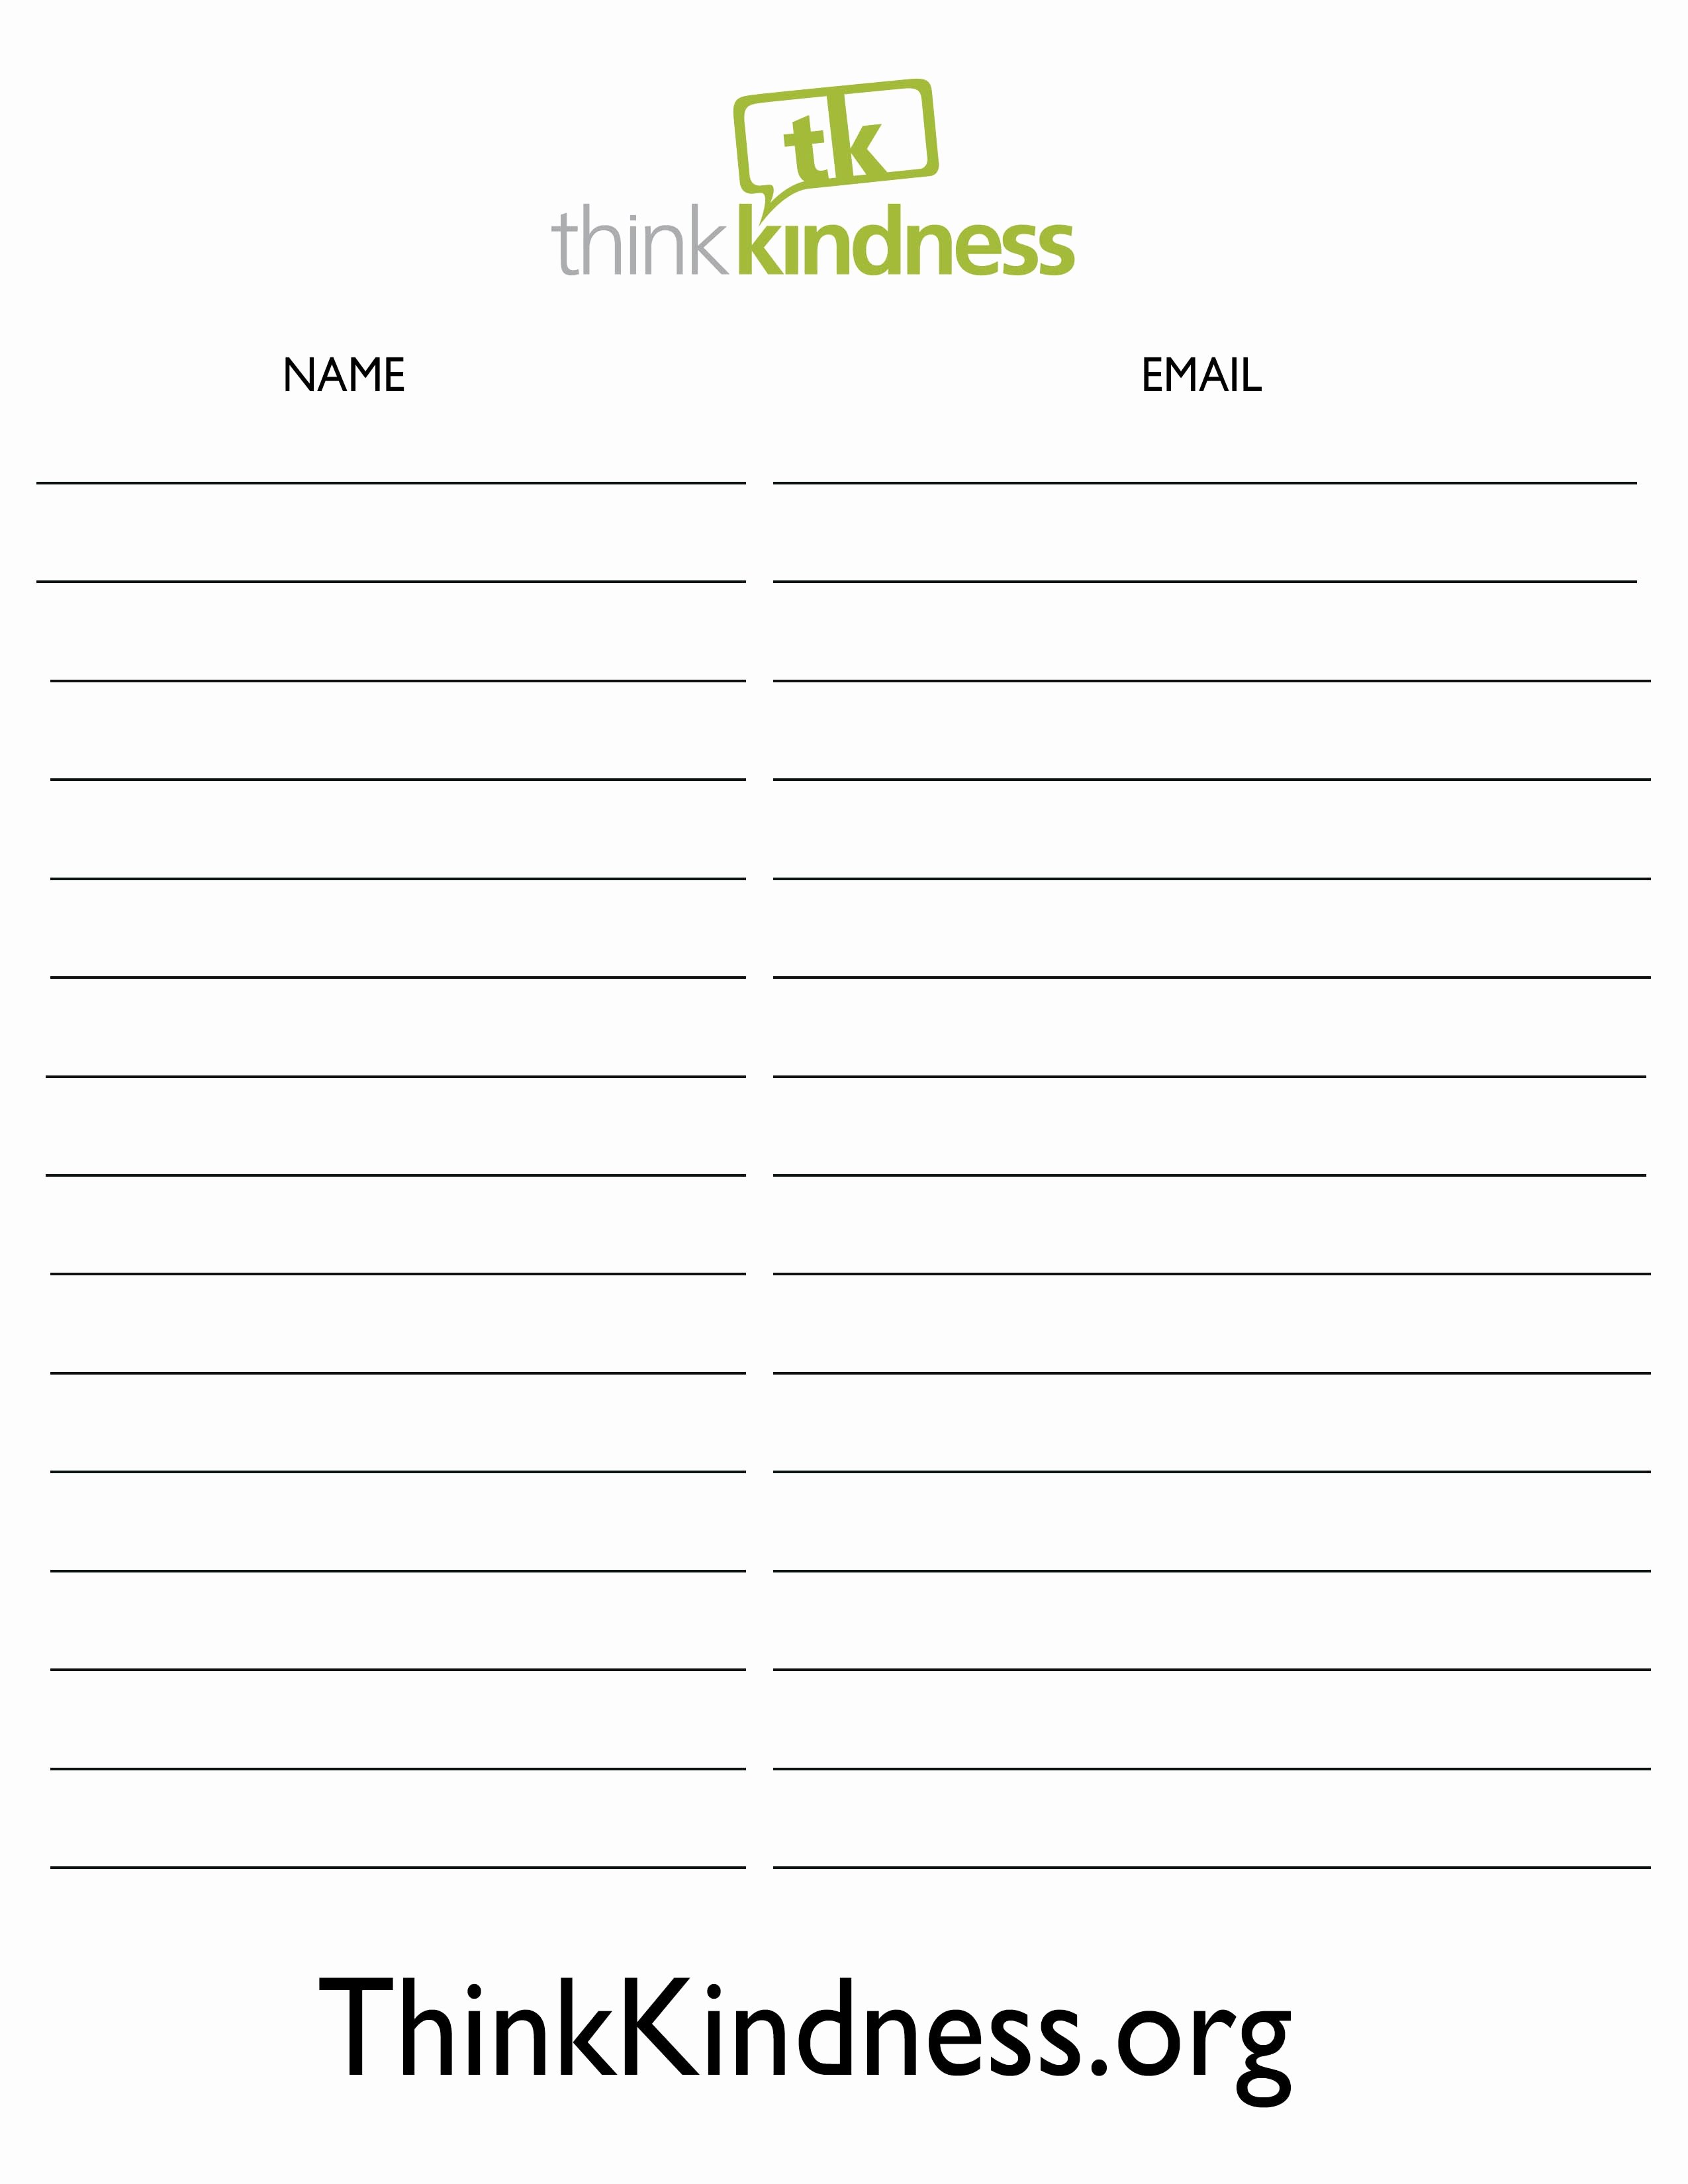 Email Signup Sheet Template Fresh Email Signup Template Portablegasgrillweber